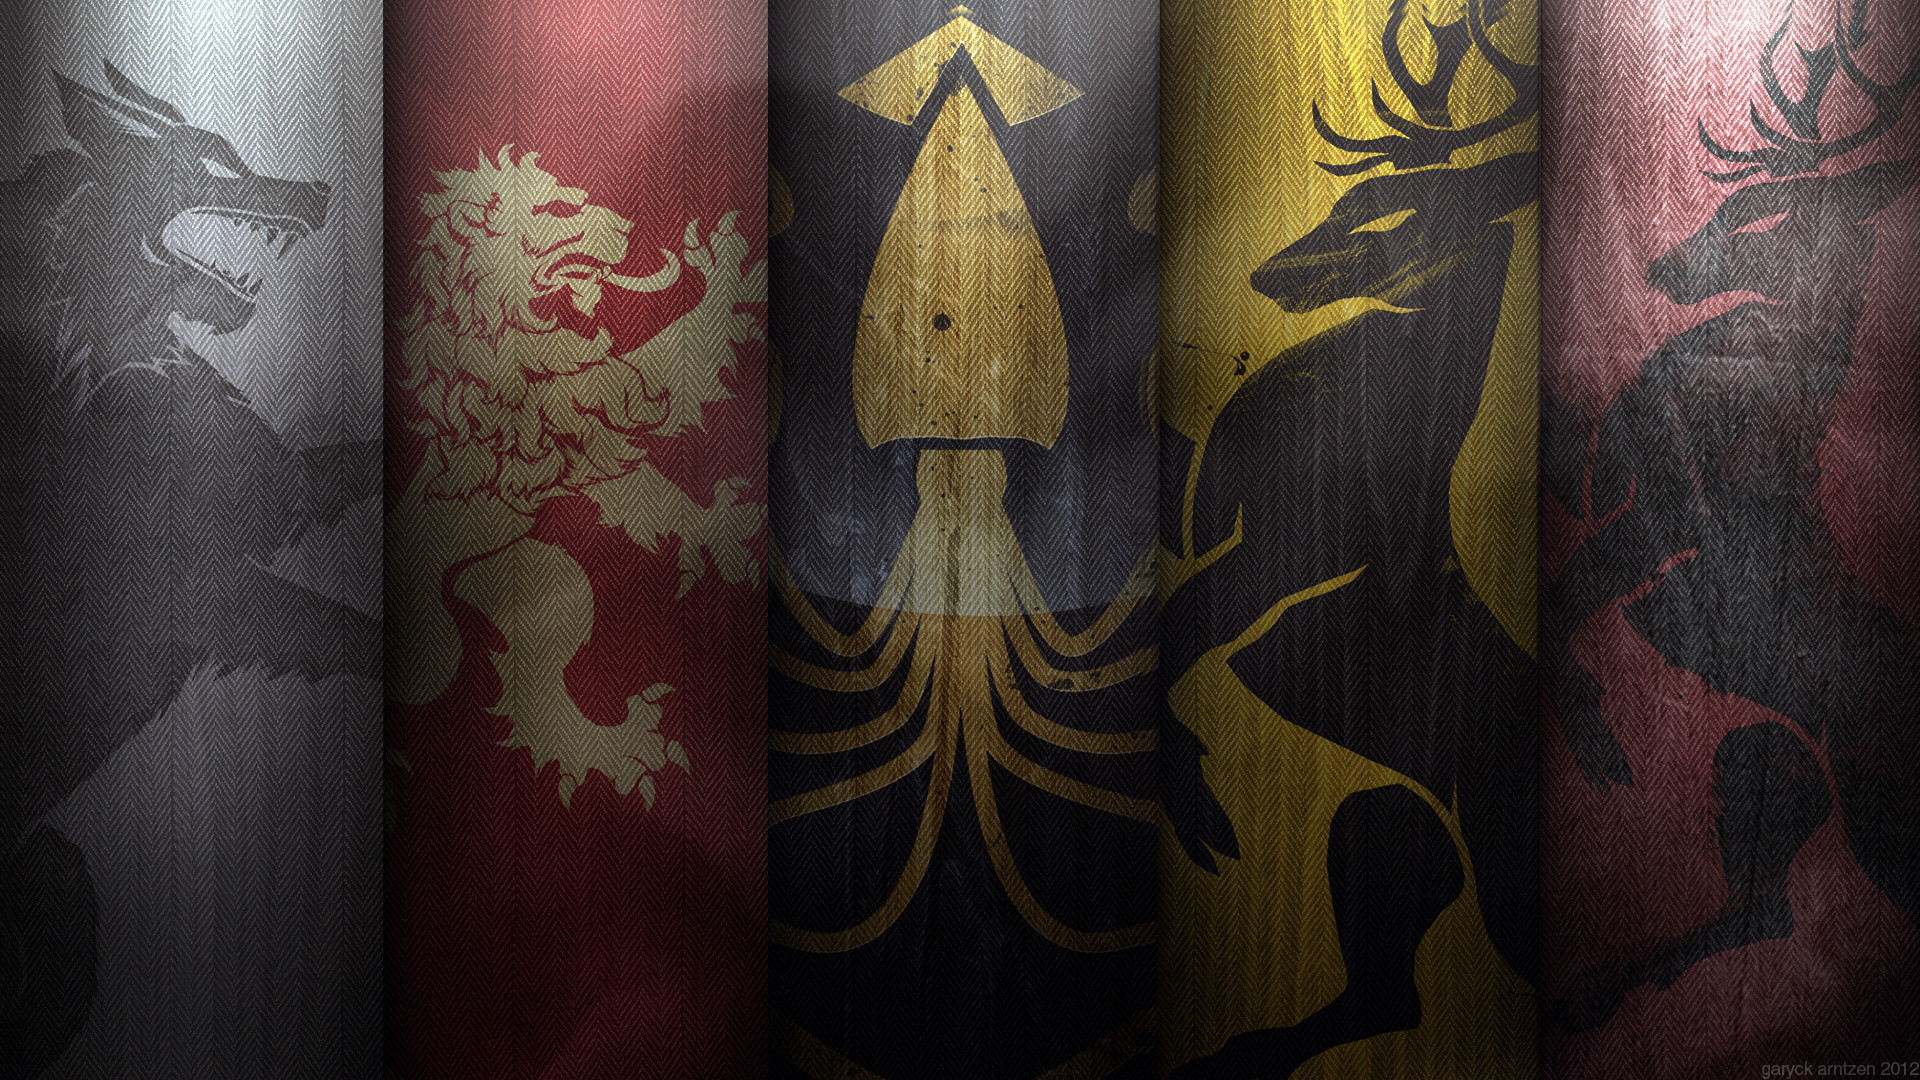 1920x1080 Game of Thrones Image Wallpaper High Definition High Quality kguuiBqm